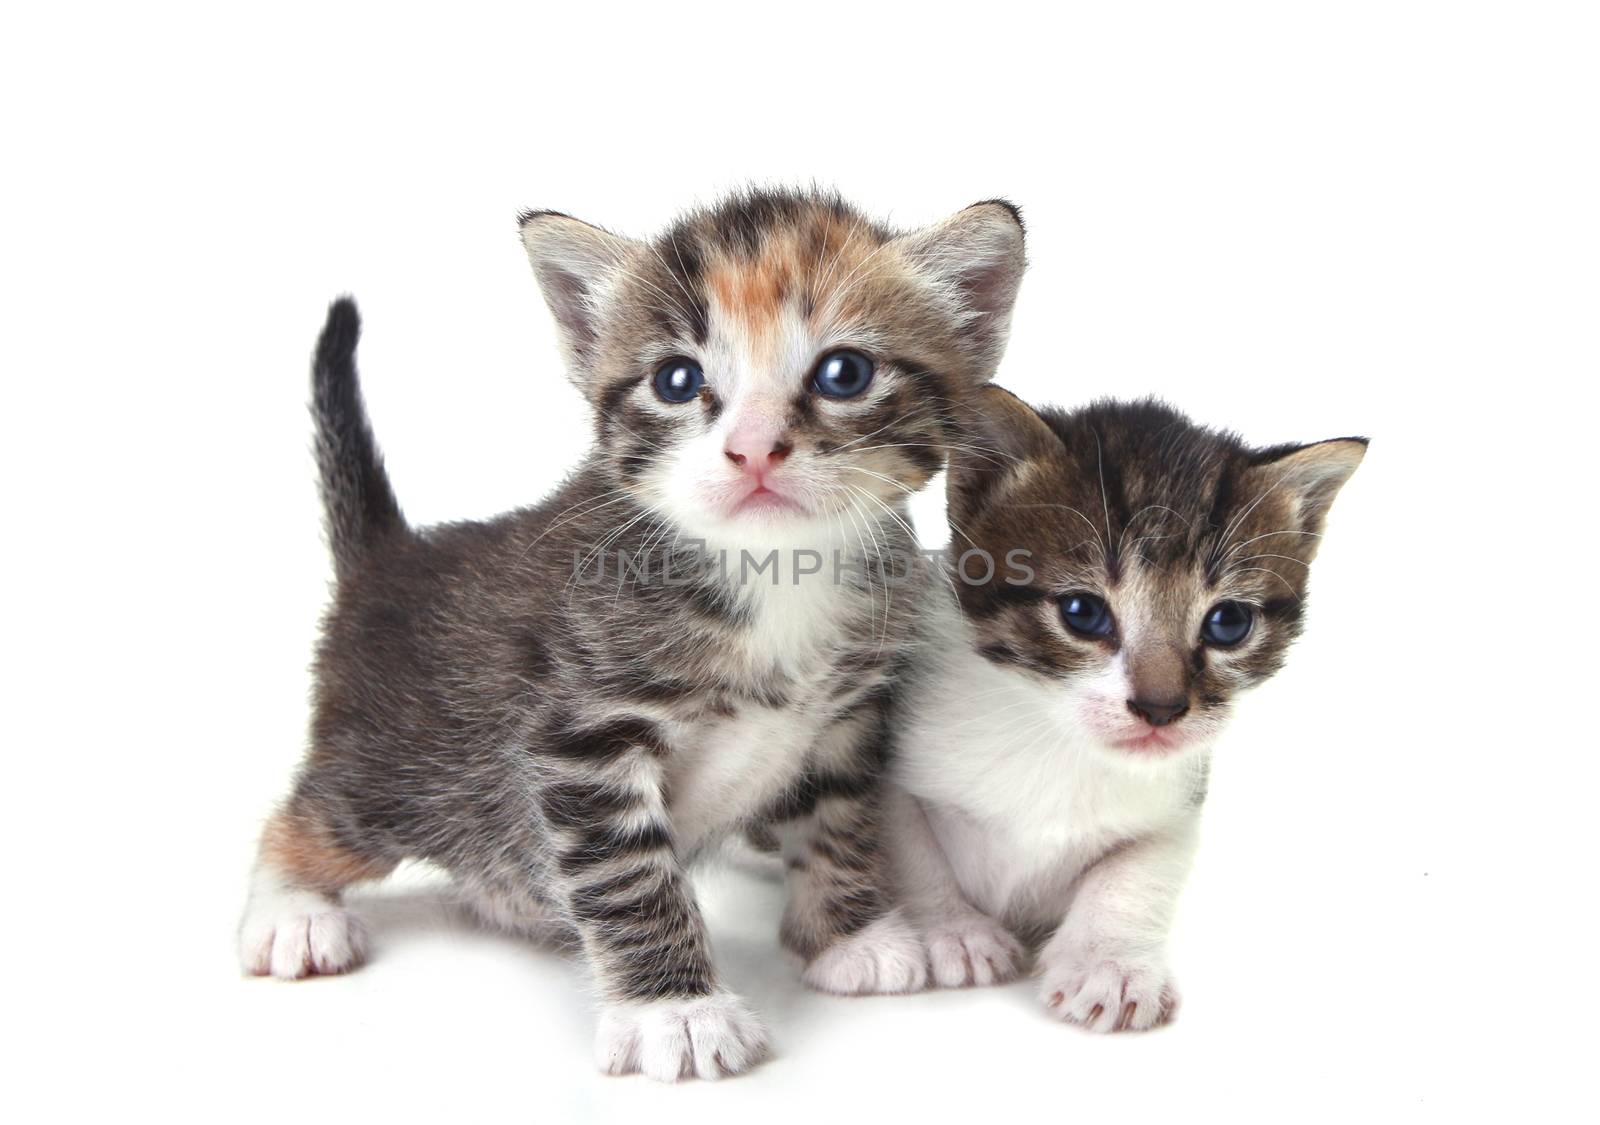 Adorable Cute Kittens on White Background